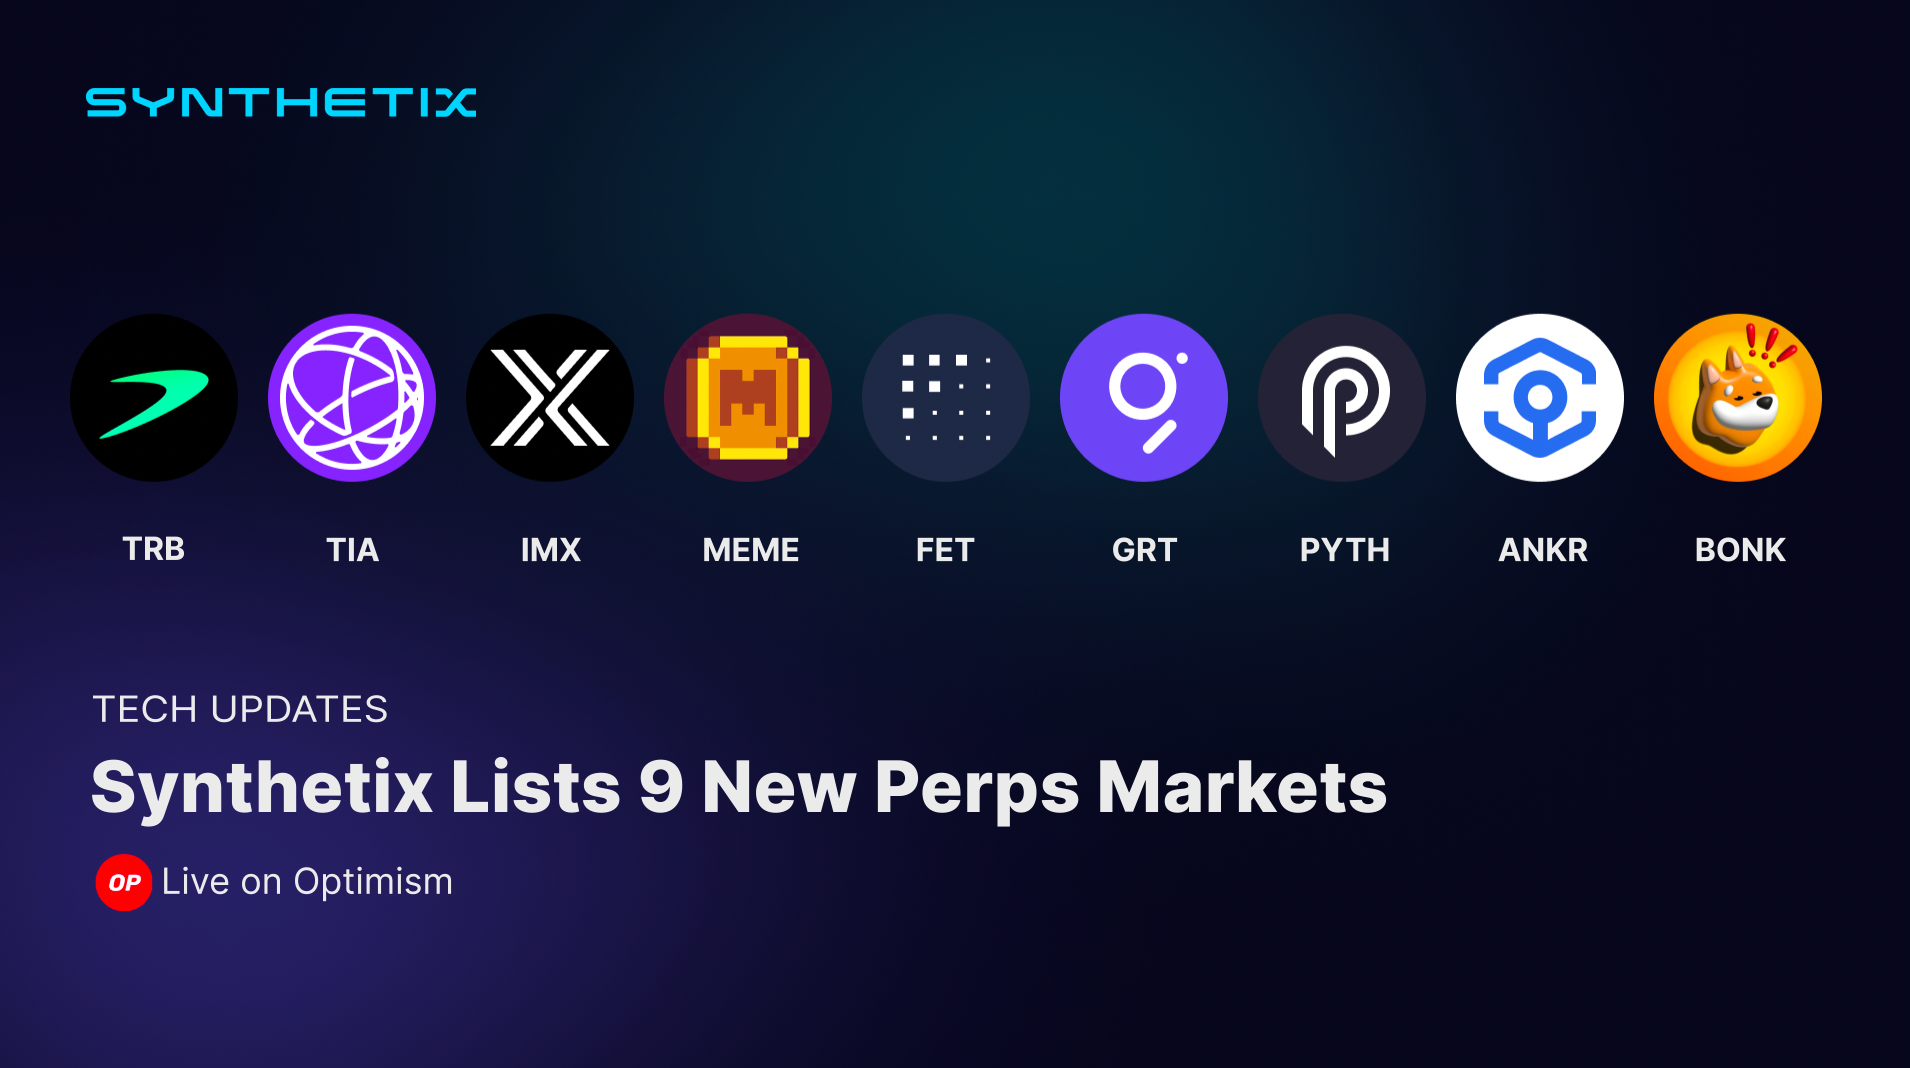 Synthetix Lists 9 New Perps Markets